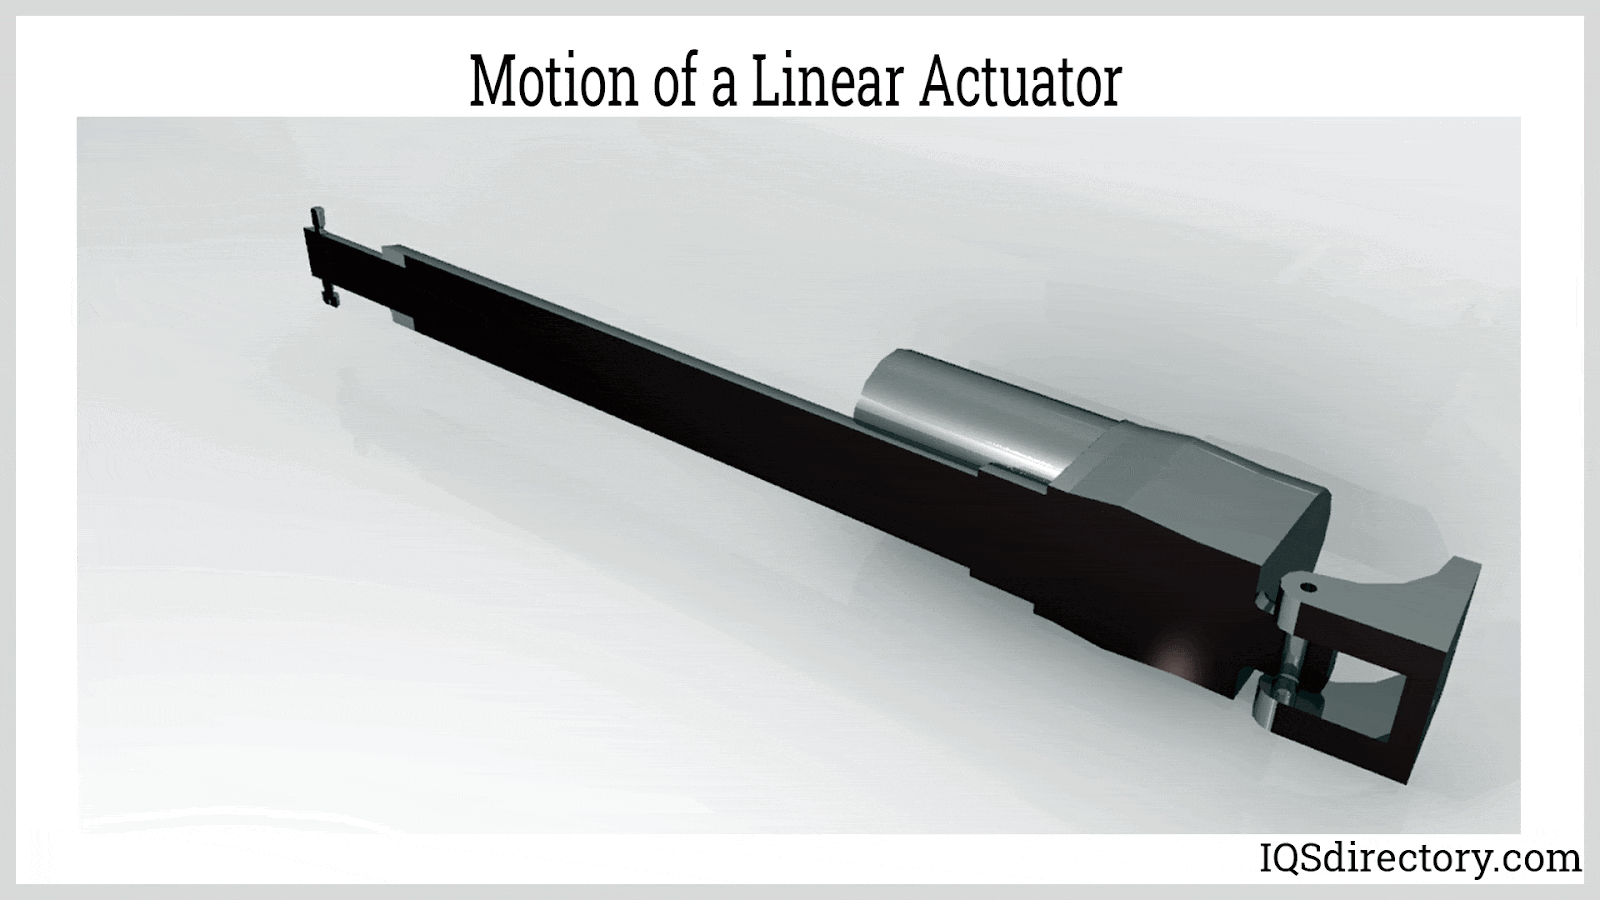 Motion of a Linear Actuator